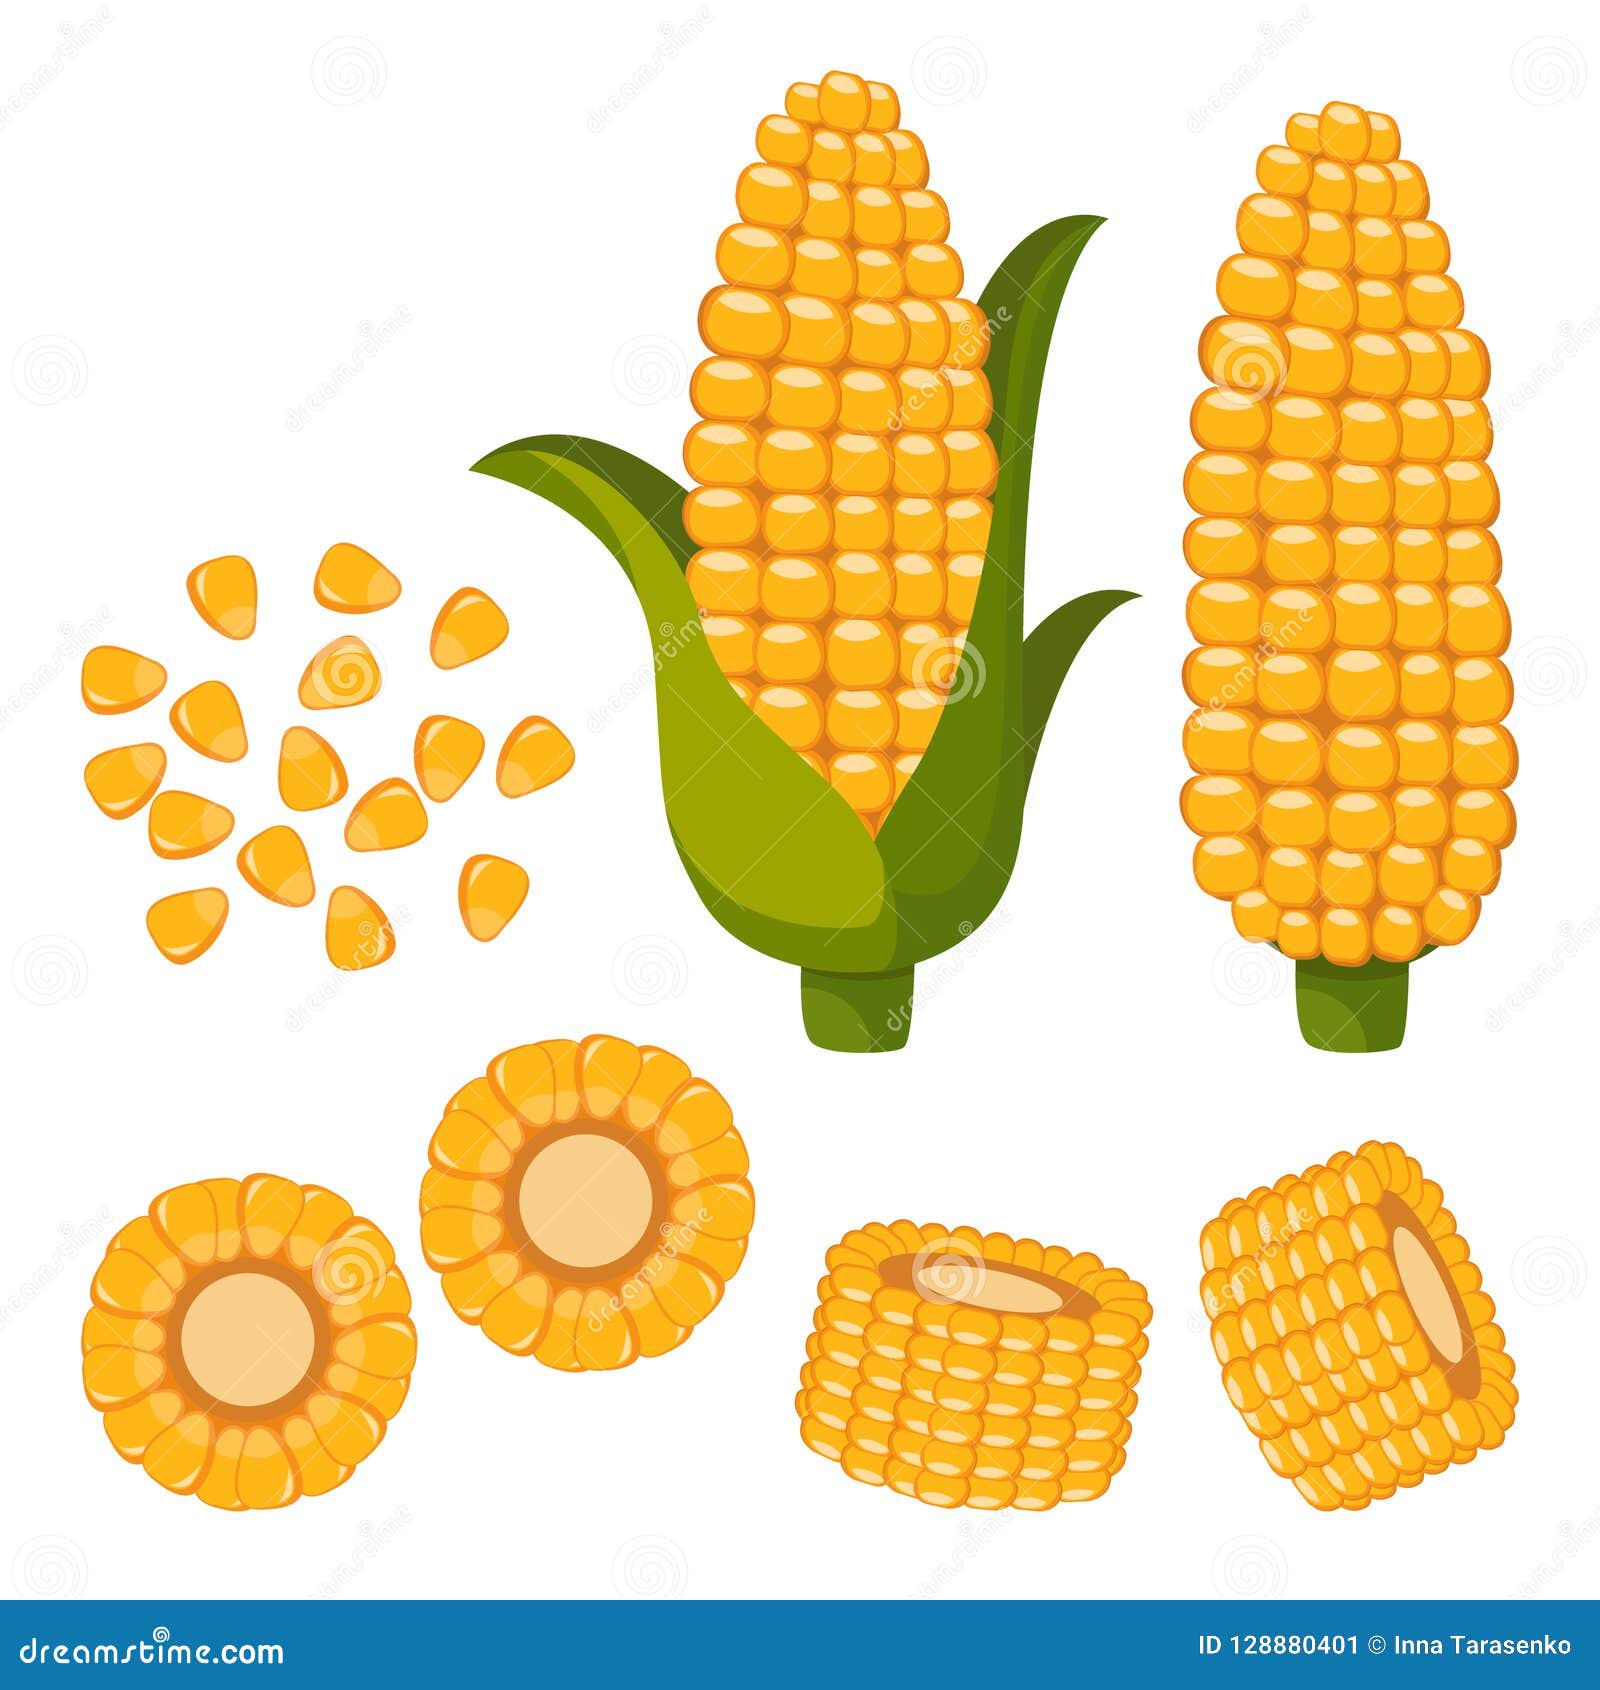 Set of Ripe Corn, Halves and Grains in Different Angles on a White ...